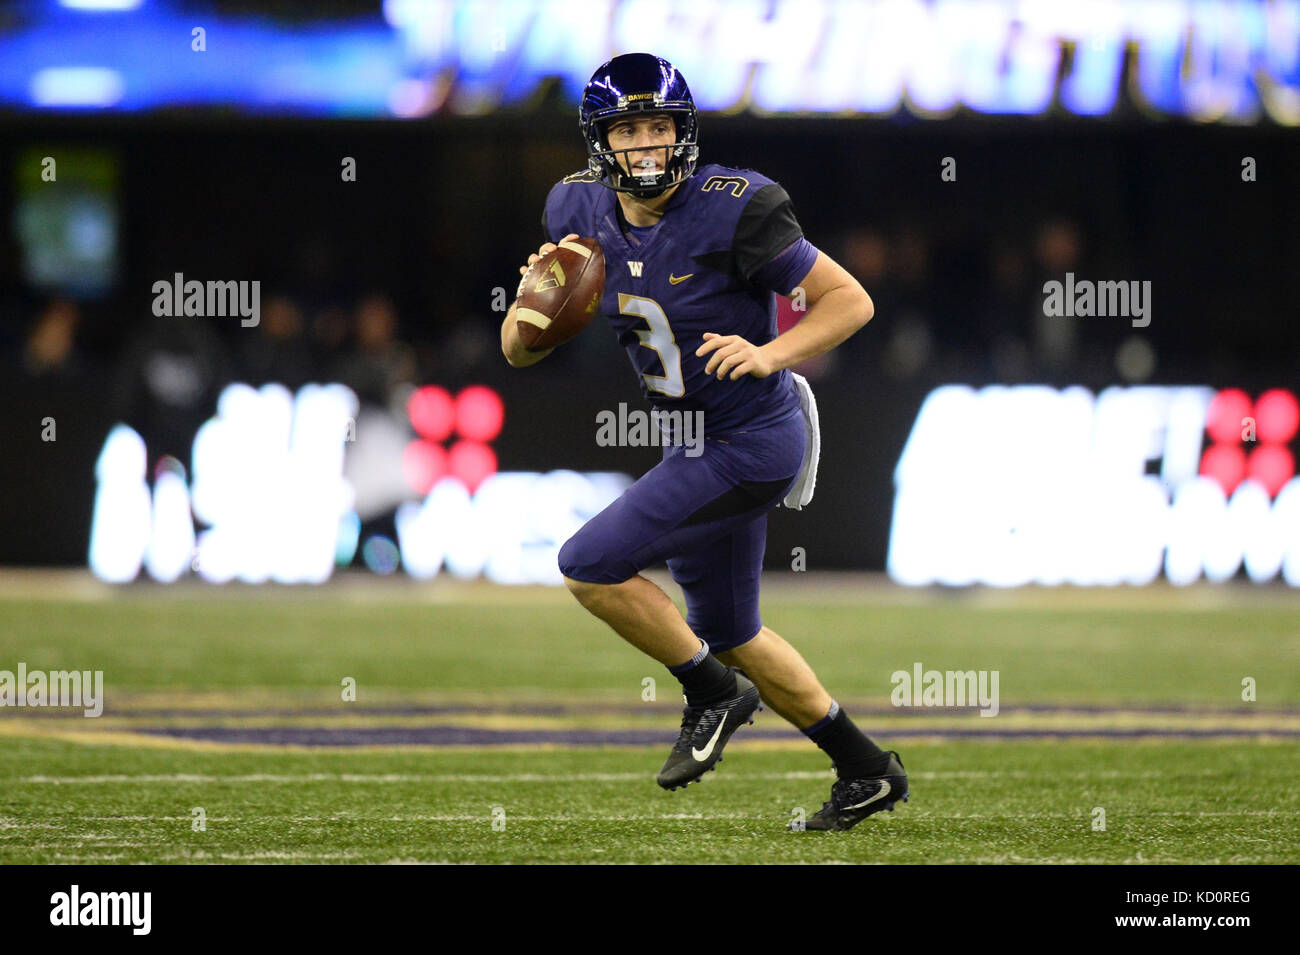 Seattle, WA, USA. 7th Oct, 2017. UW quarterback Jake Browning (3) in action during a PAC12 football game between the Cal Bears and the Washington Huskies. The game was played at Husky Stadium on the University of Washington campus in Seattle, WA. Jeff Halstead/CSM/Alamy Live News Stock Photo